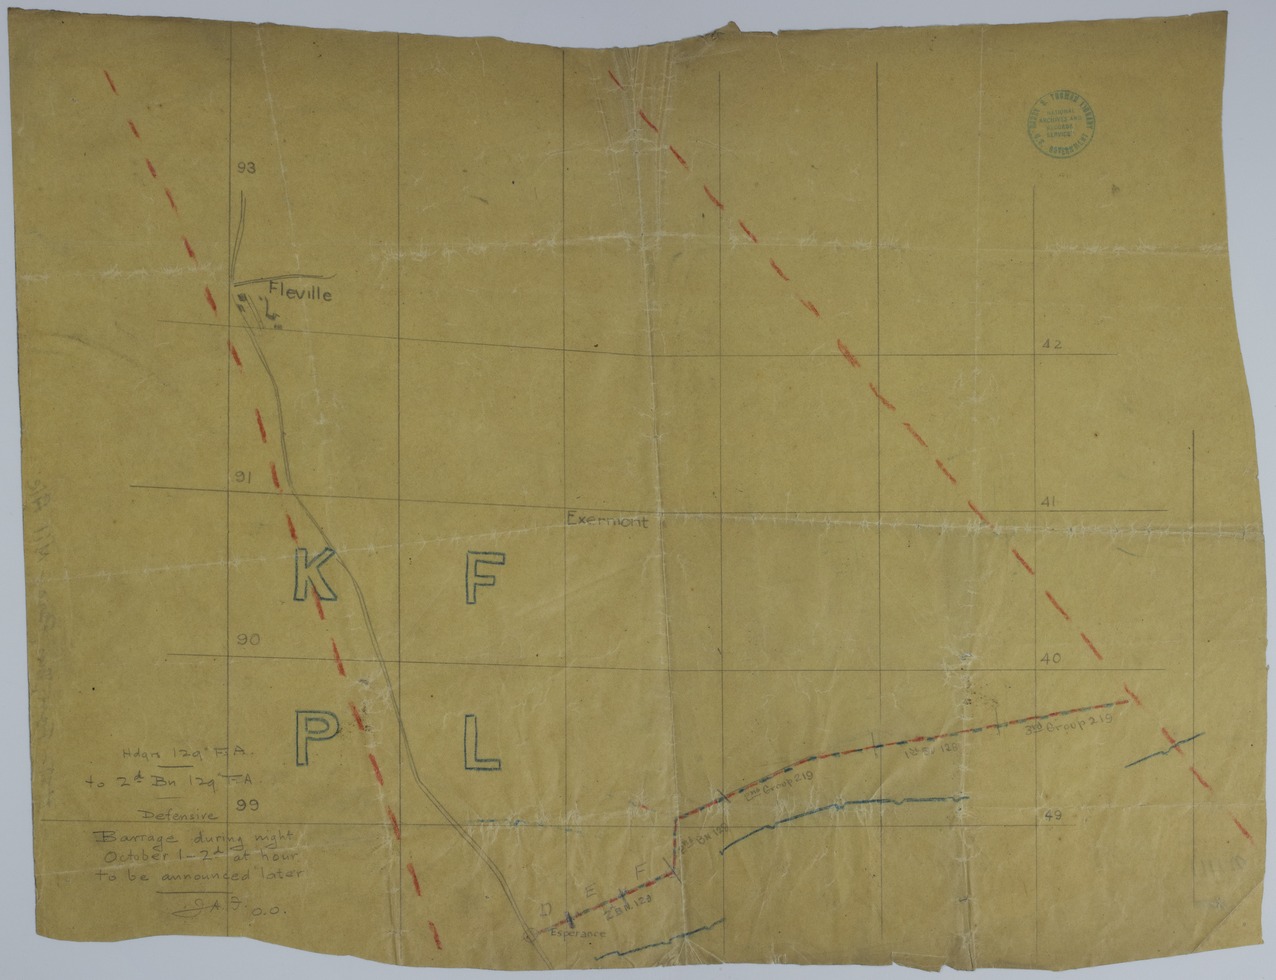 Map of a Night Barrage on October 1-2, 1918